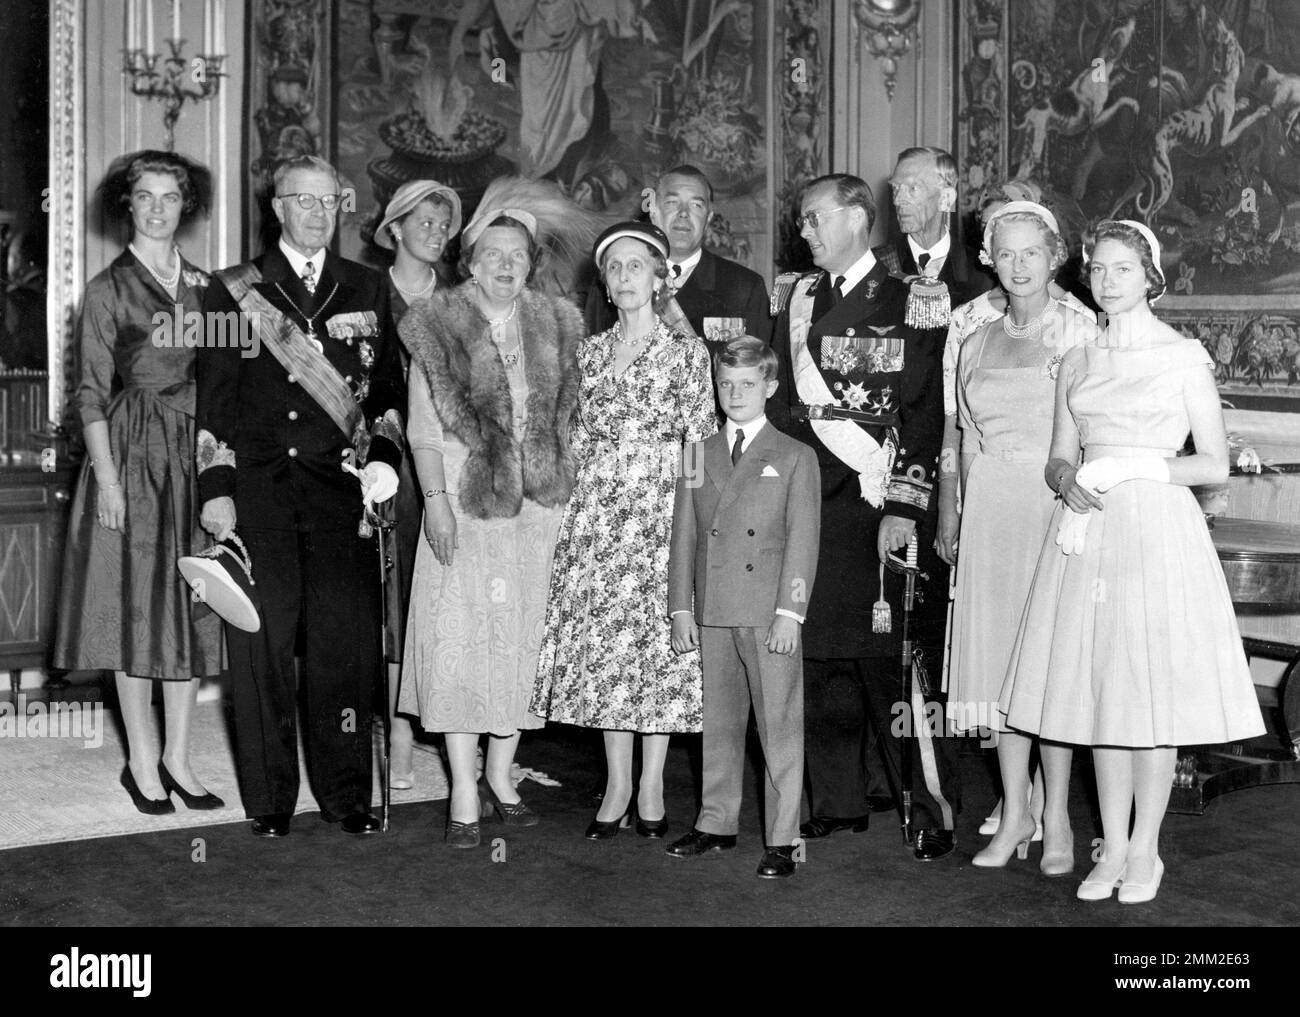 Carl XVI Gustaf, King of Sweden. Born 30 april 1946. Pictured in front in a group picture taken during Queen Juliana of Hollands visit to Sweden 1957. From left Princess Margaretha, King Gustav VI Adolf, Princess Birgitta, Queen Juliana, Queen Louise of Sweden, Prince Bertil of Sweden, Prince Bernhard of Holland, Prince Wilhelm of Sweden, Princess Sibylla of Sweden, Princess Desiree of Sweden. Stock Photo